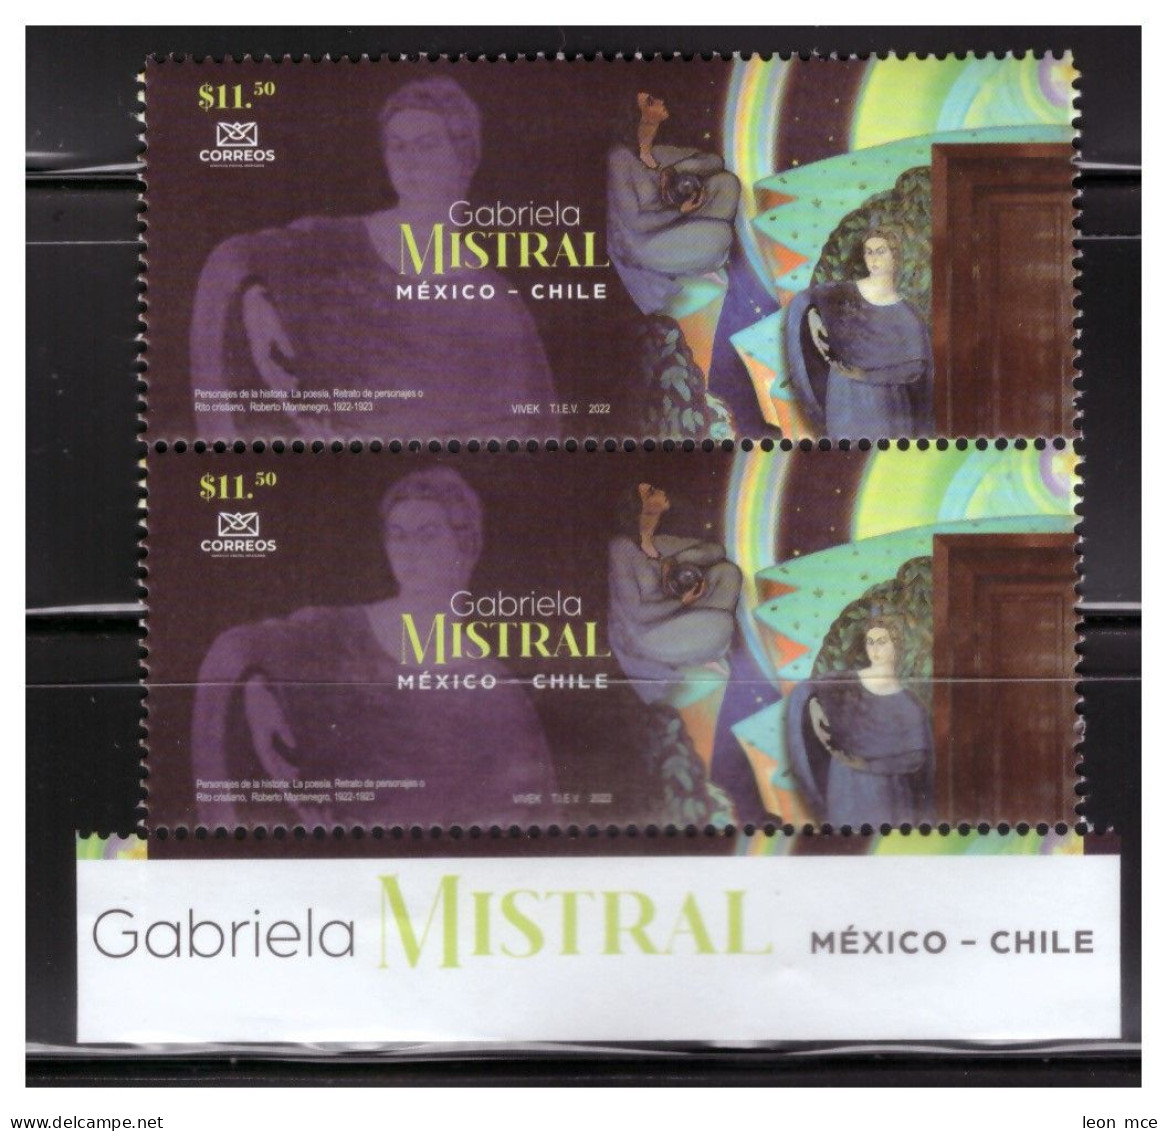 2022 MÉXICO - CHILE "Gabriela Mistral", EMISIÓN CONJUNTA, Writer, Joint Issue, 2 STAMPS WITH LEGEND MNH - Mexique